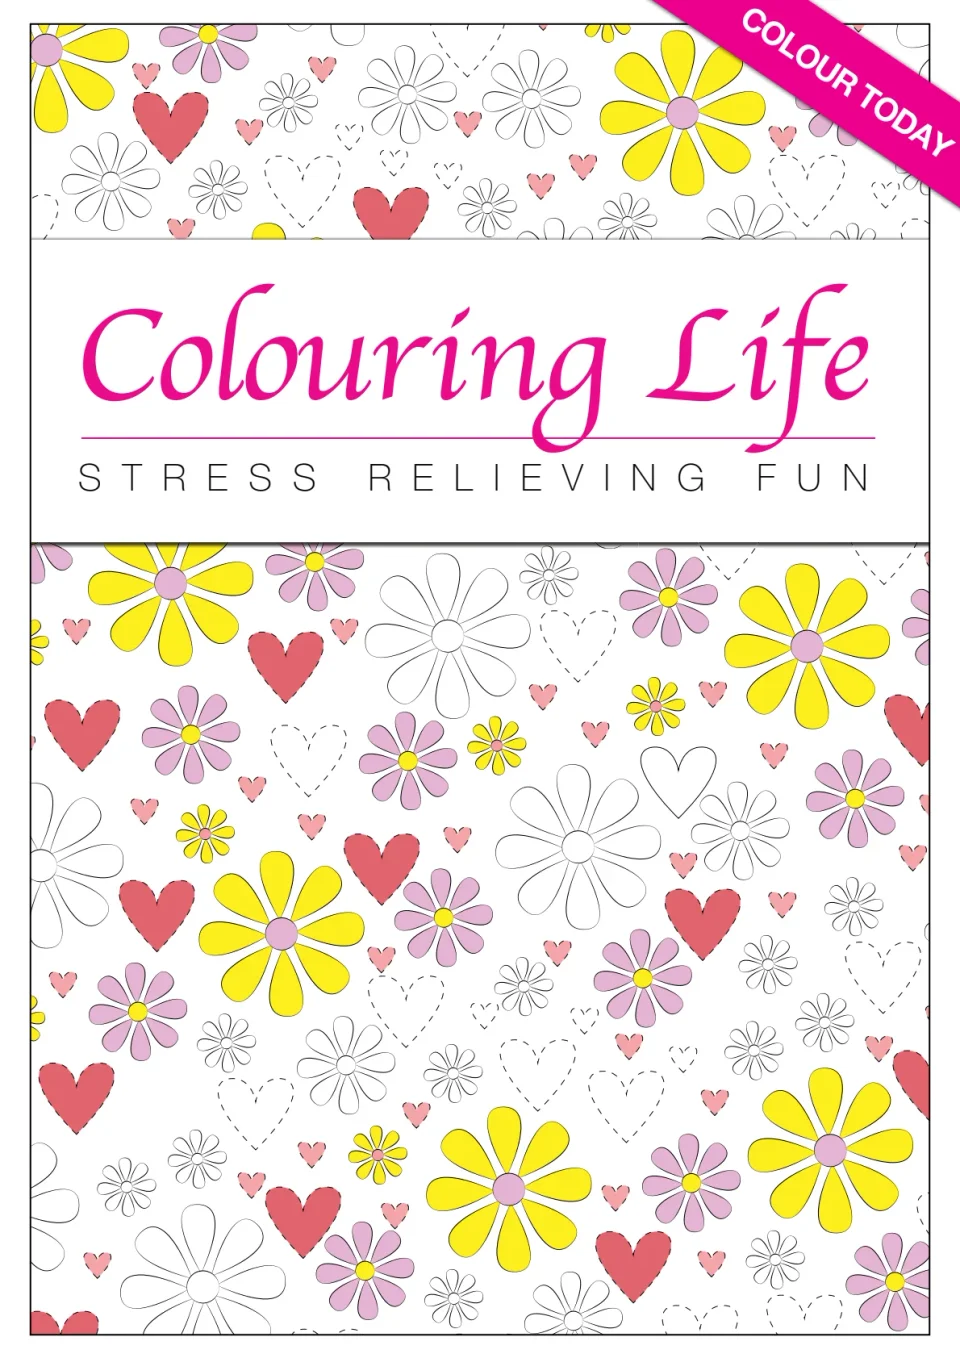 Colouring Life